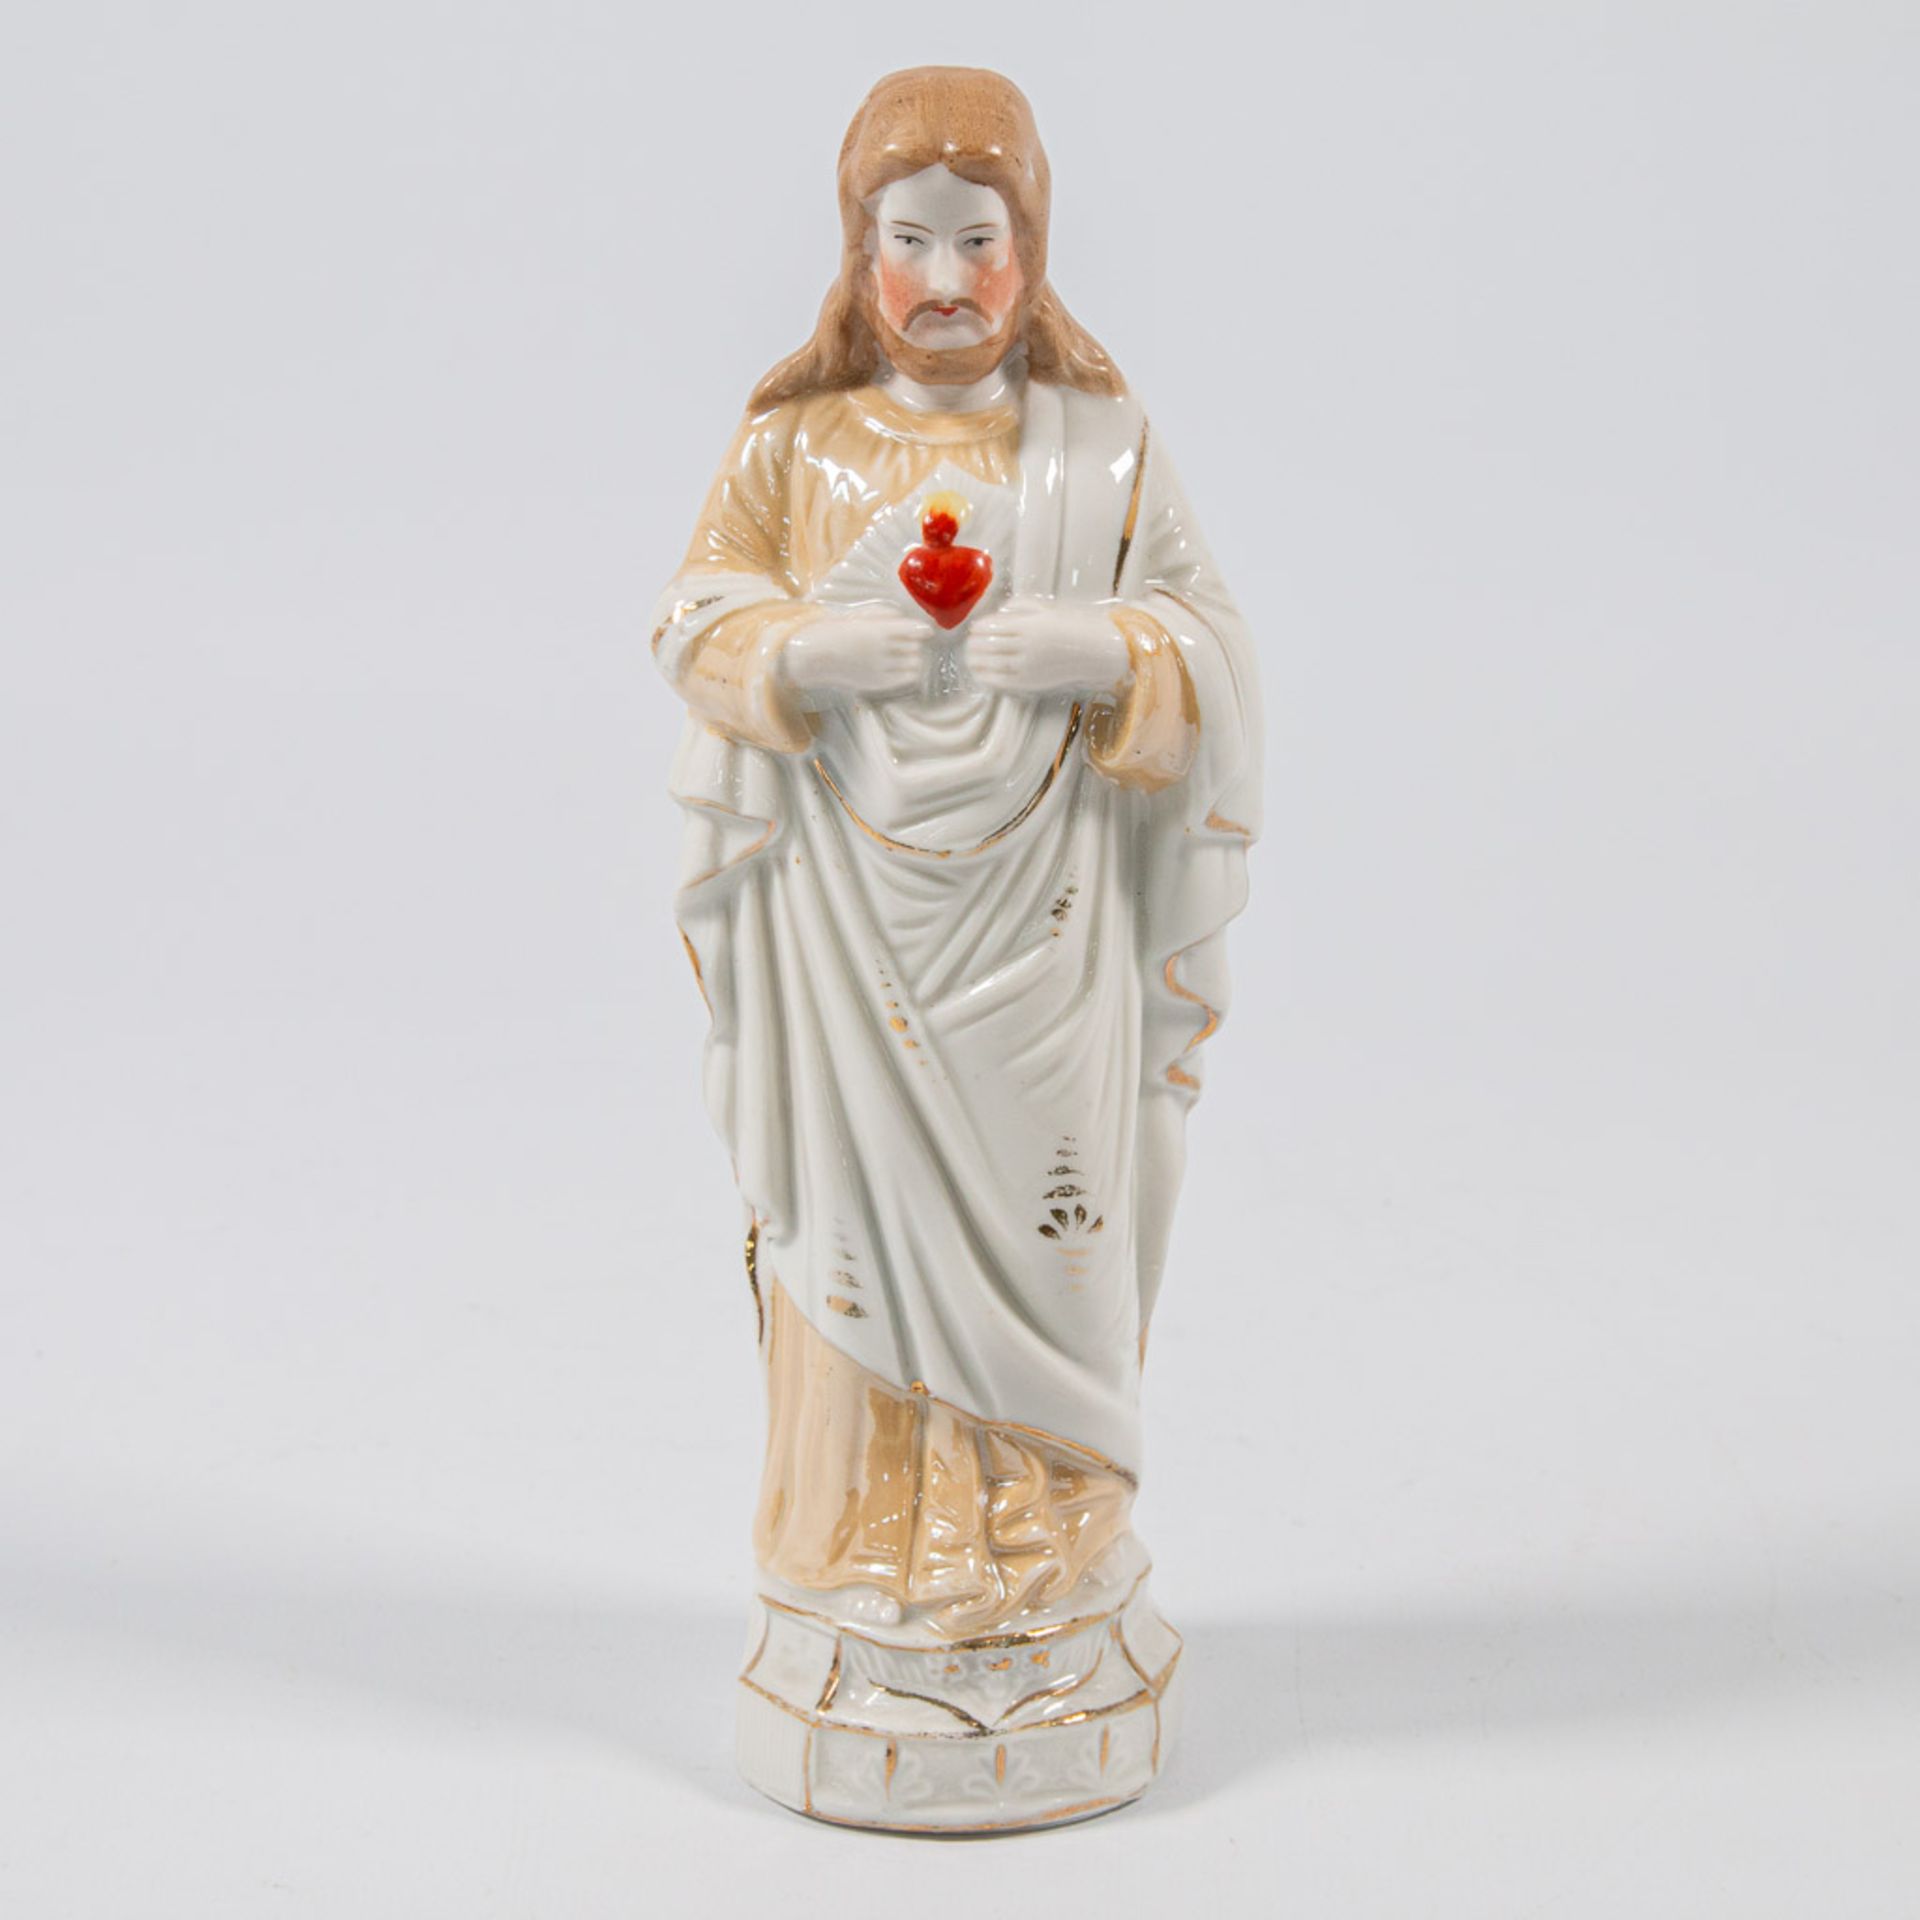 A collection of 11 bisque porcelain holy statues, Mary, Joseph, and Madonna. - Image 8 of 49